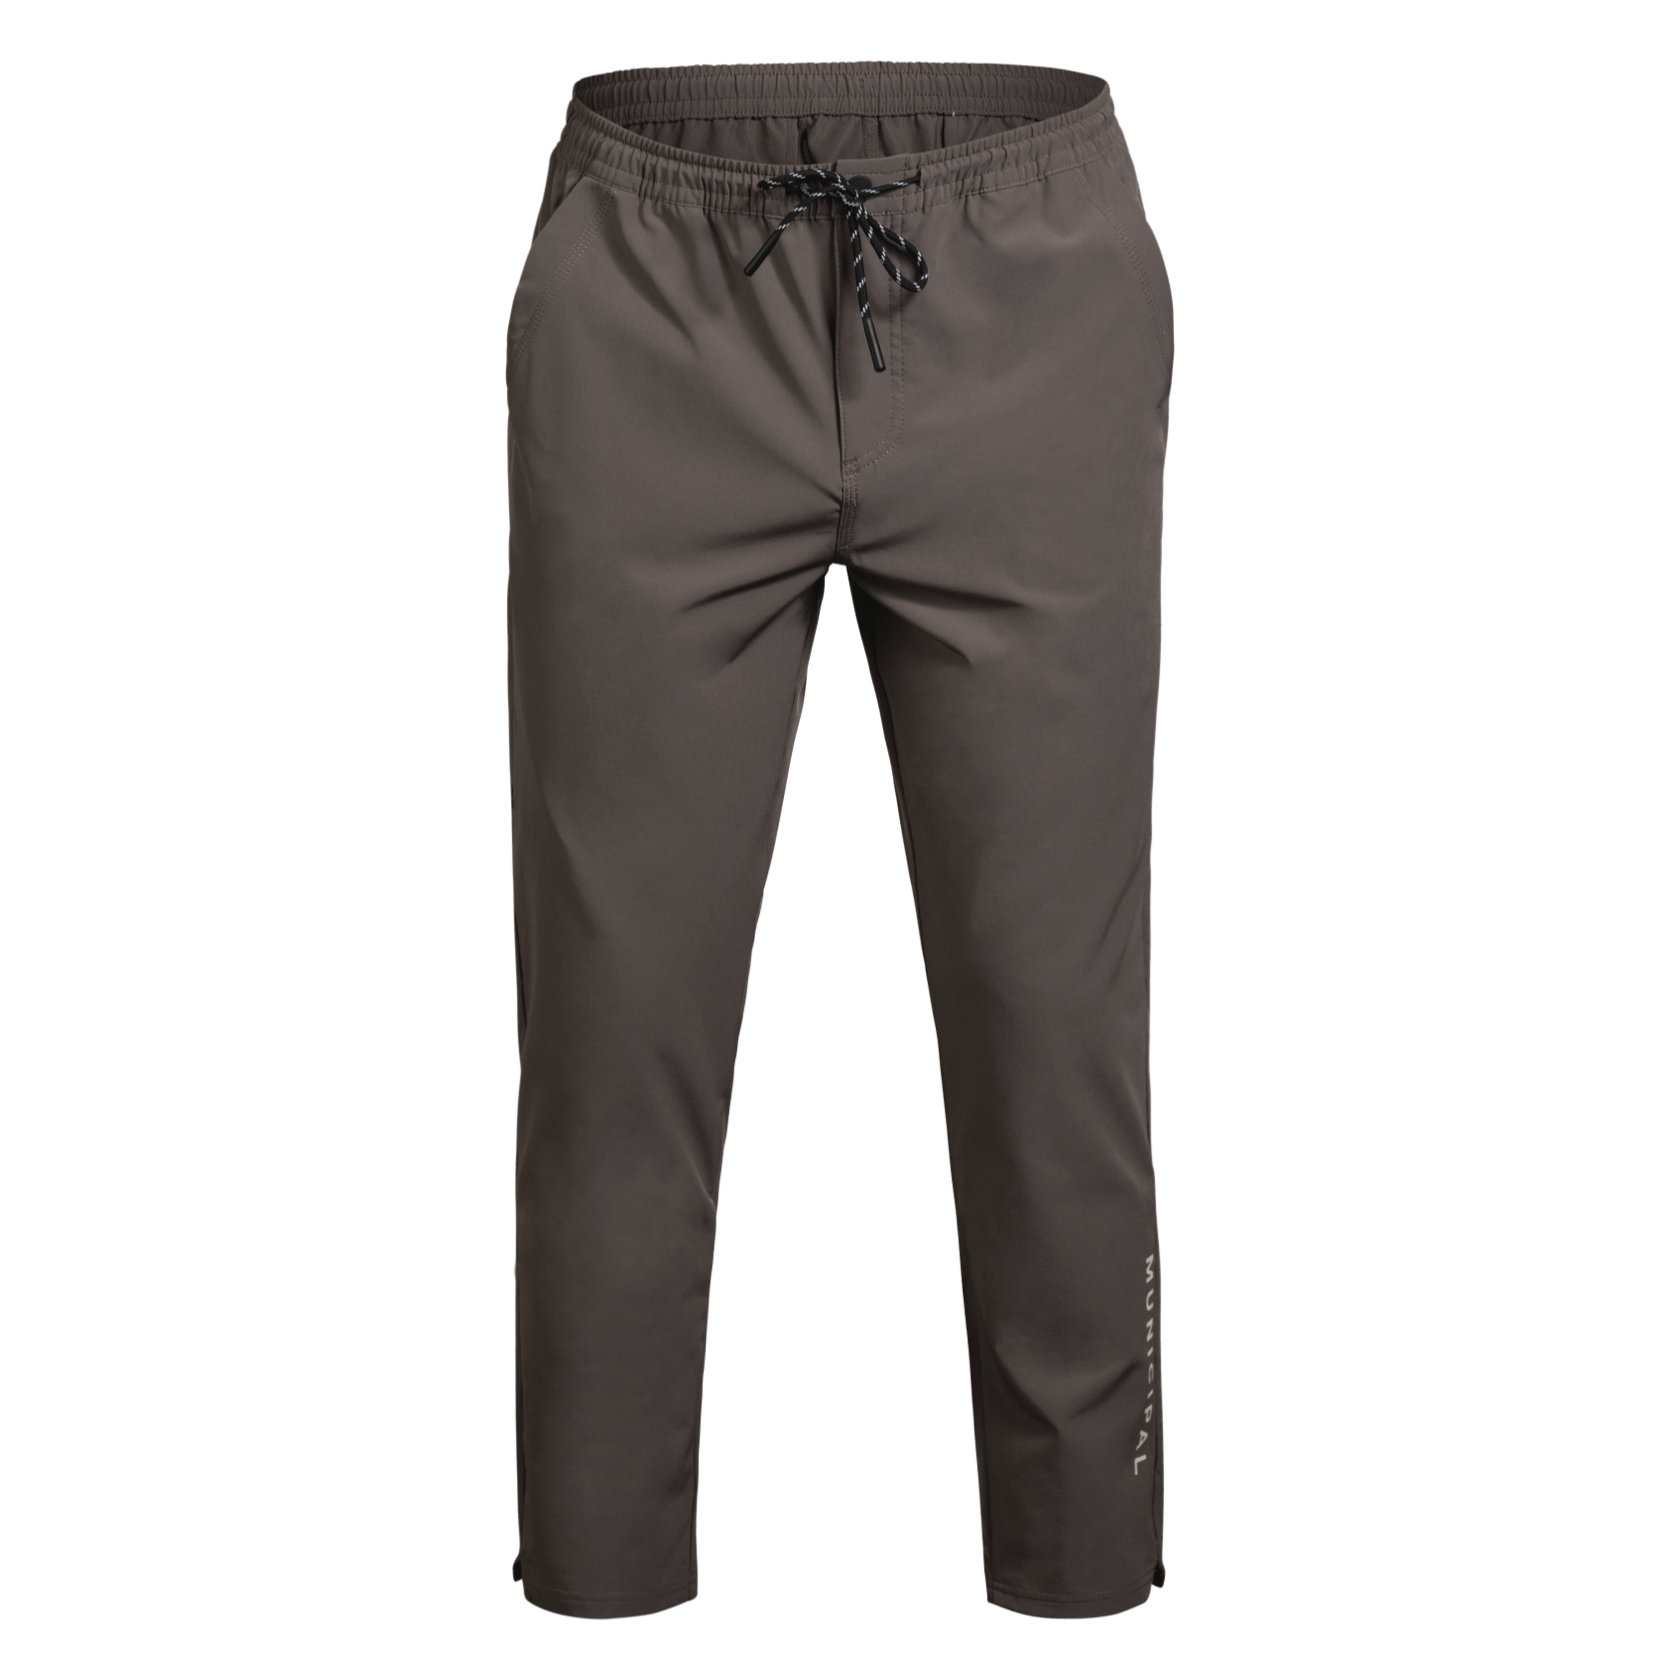 Sportcross Easy Pant |Charcoal| detail